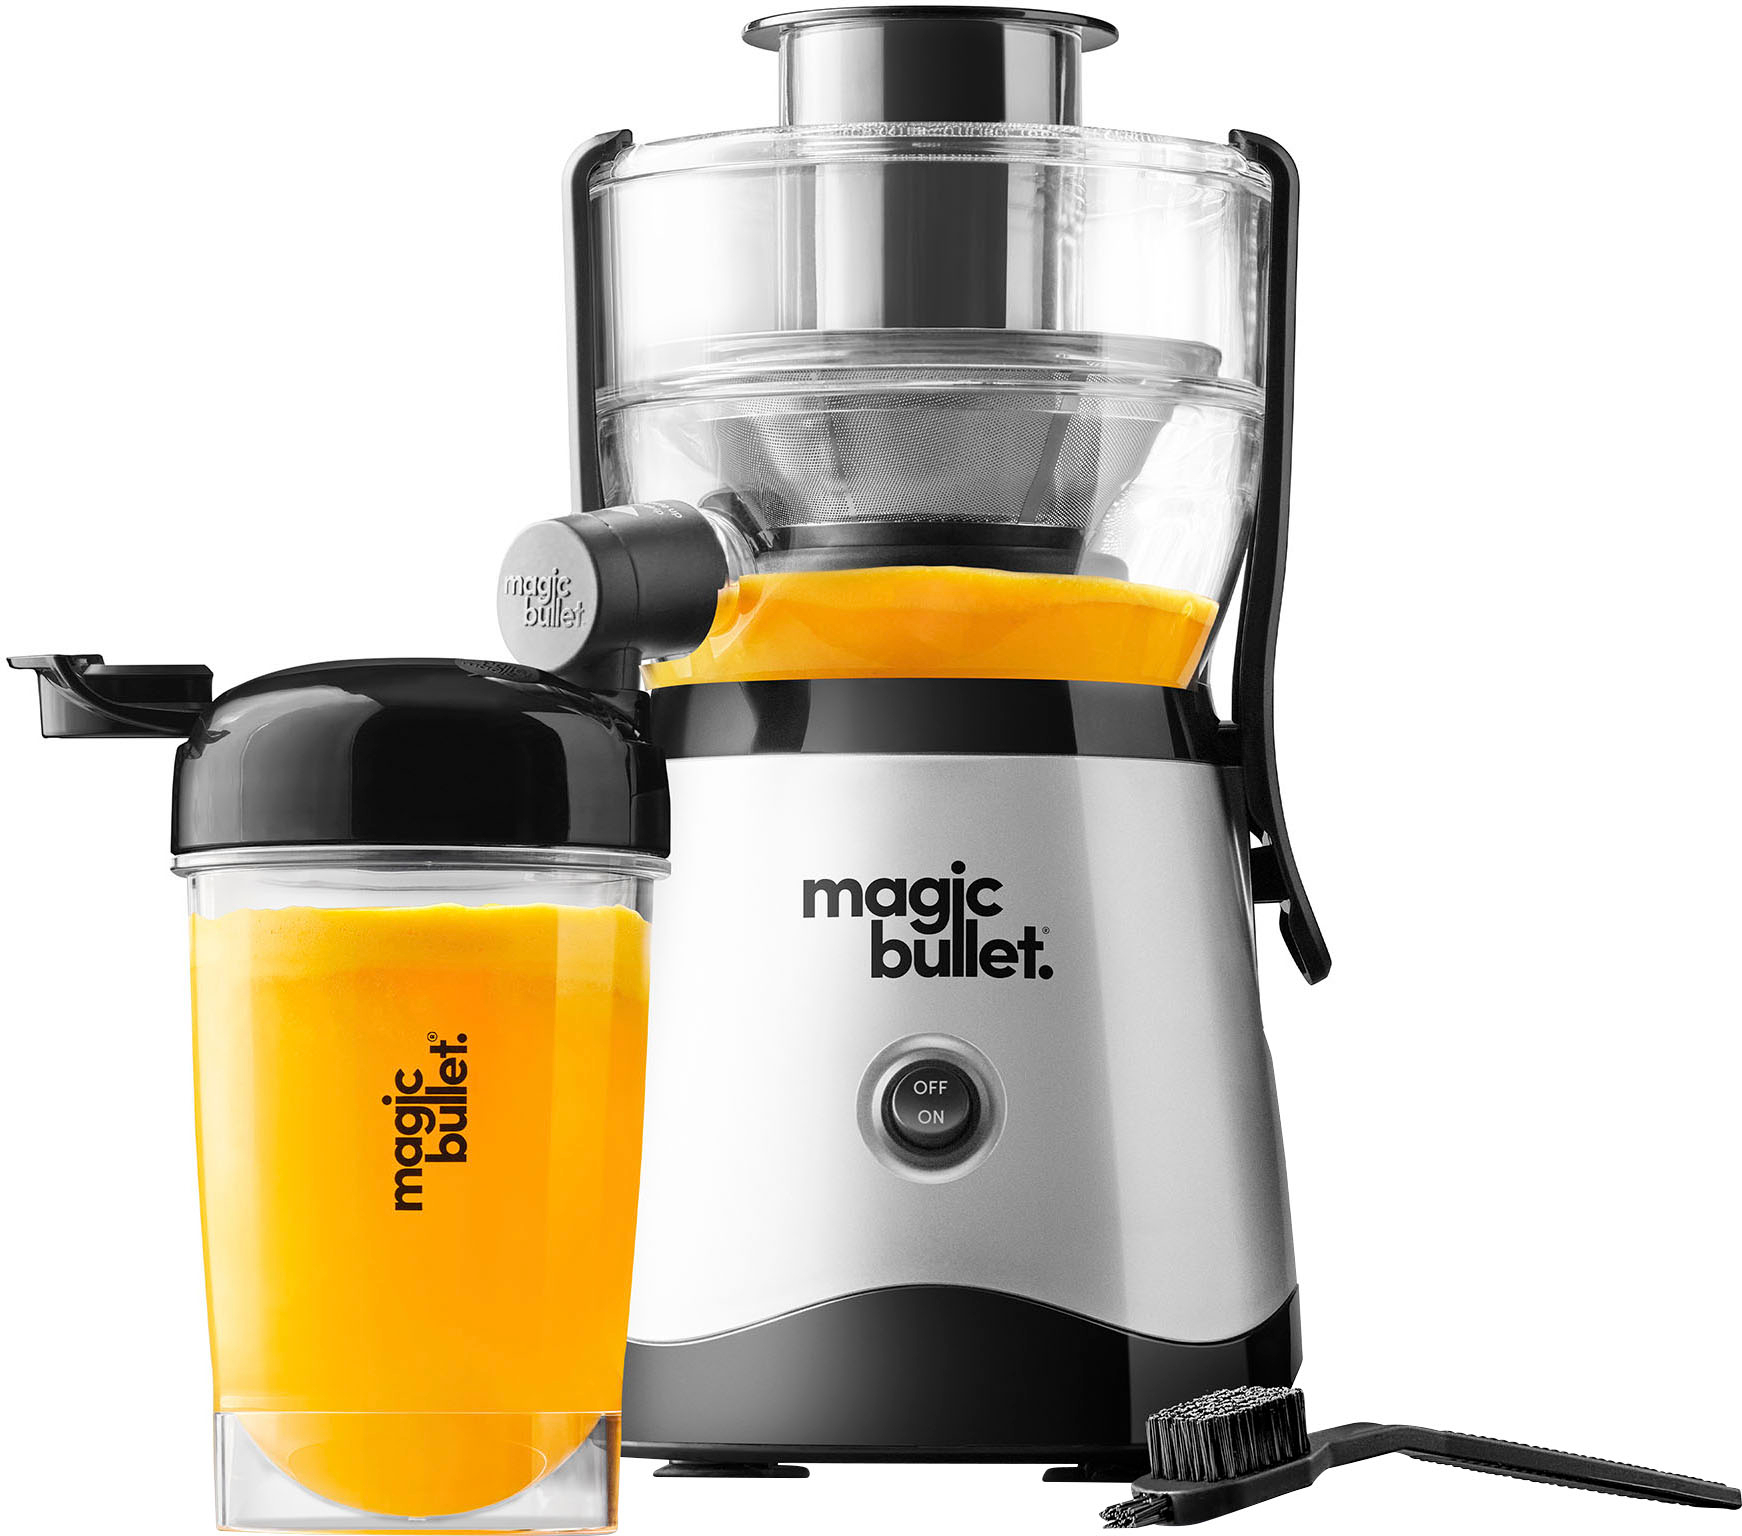  Magic Bullet - Compact Juicer with cup - MBJ50100 - Silver